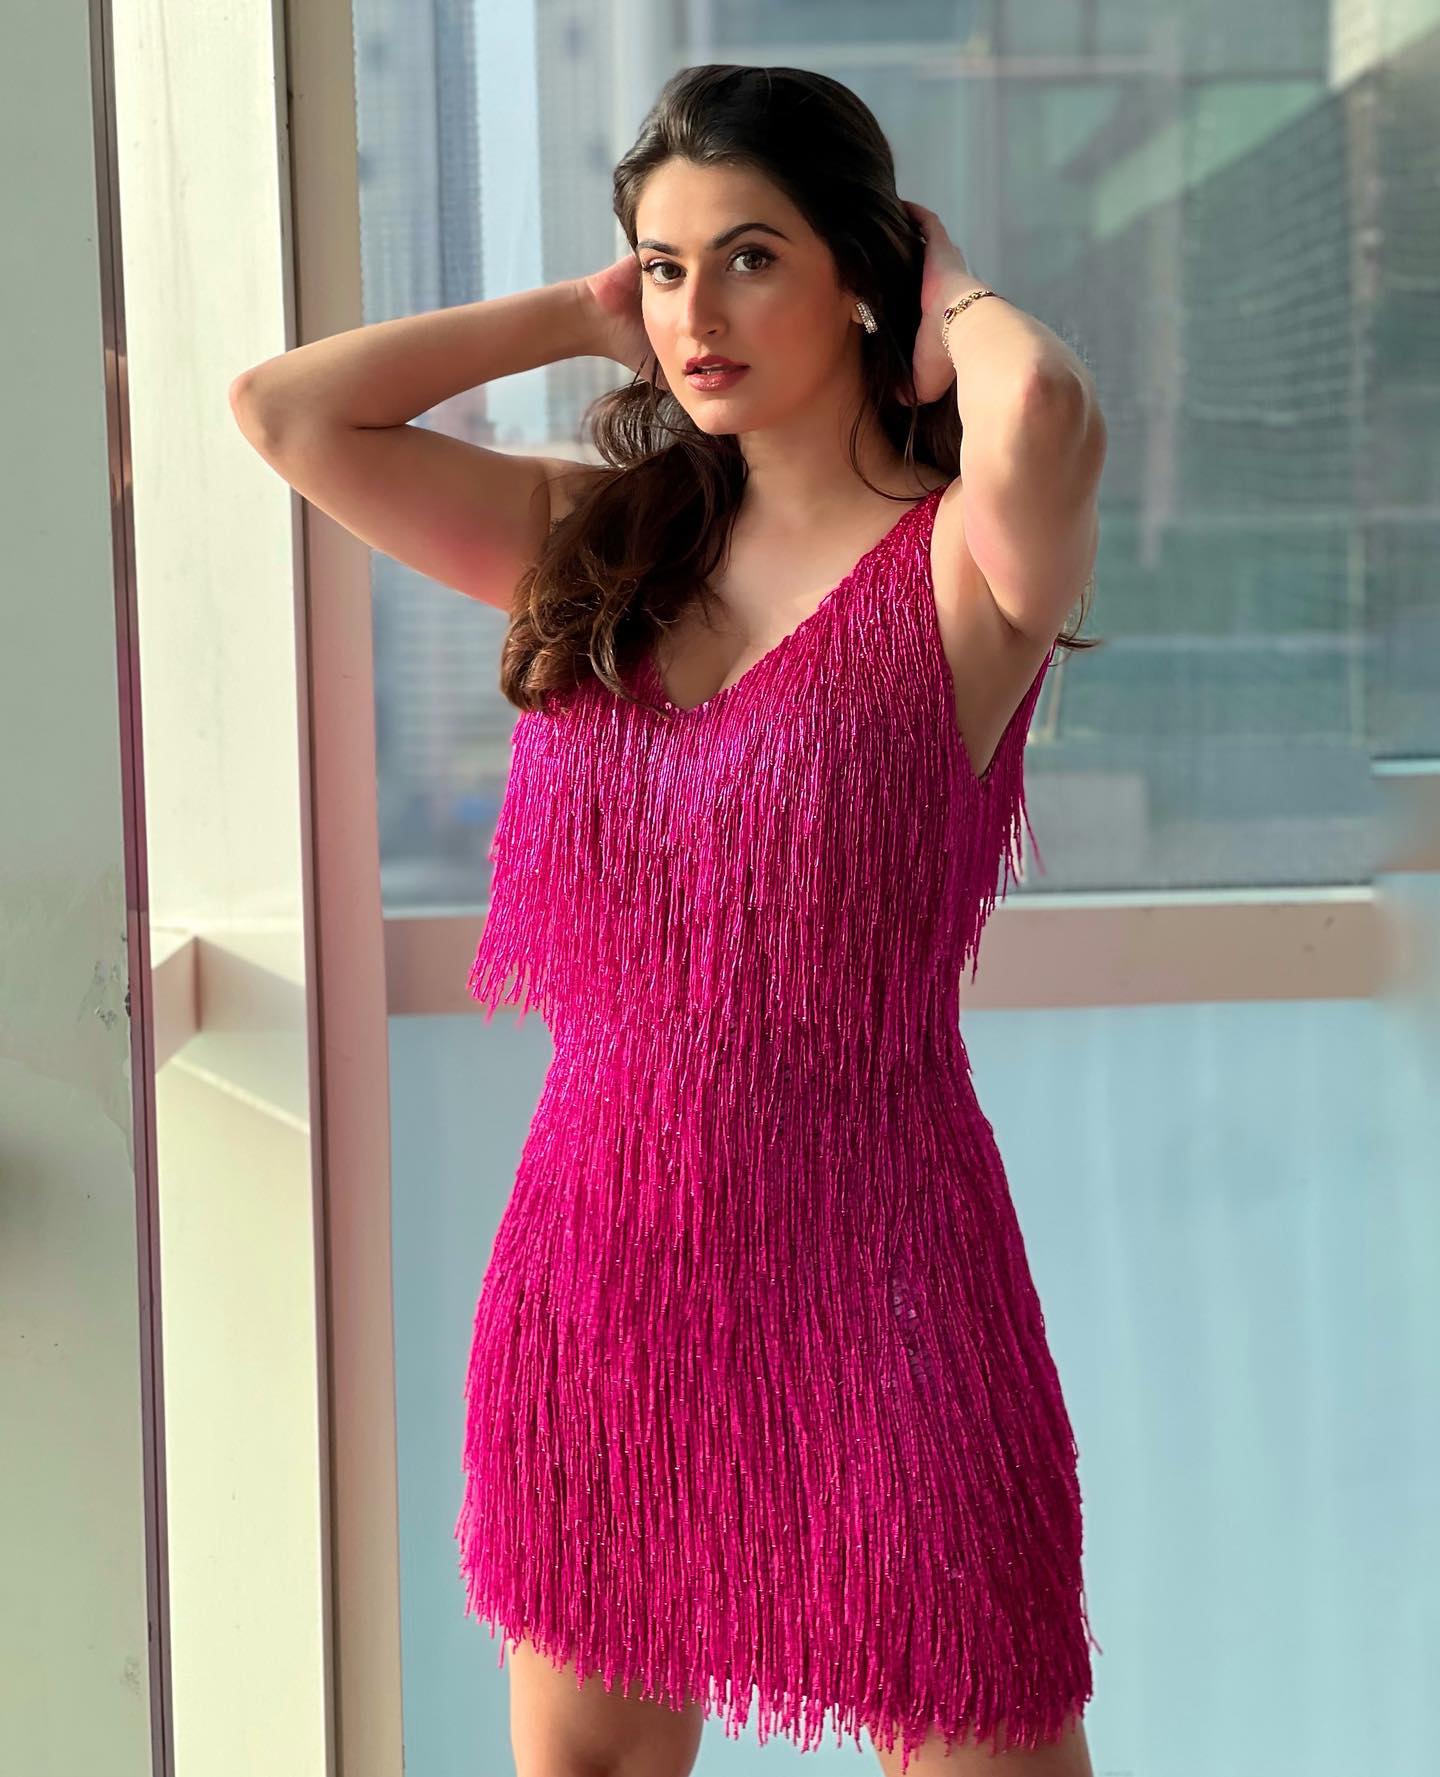 Bollywood Diva Shivaleeka Oberoi Party Animal Look In Pink V -Neck Long Beaded Tassel Embroidery Dress With Hot Pink Pumps